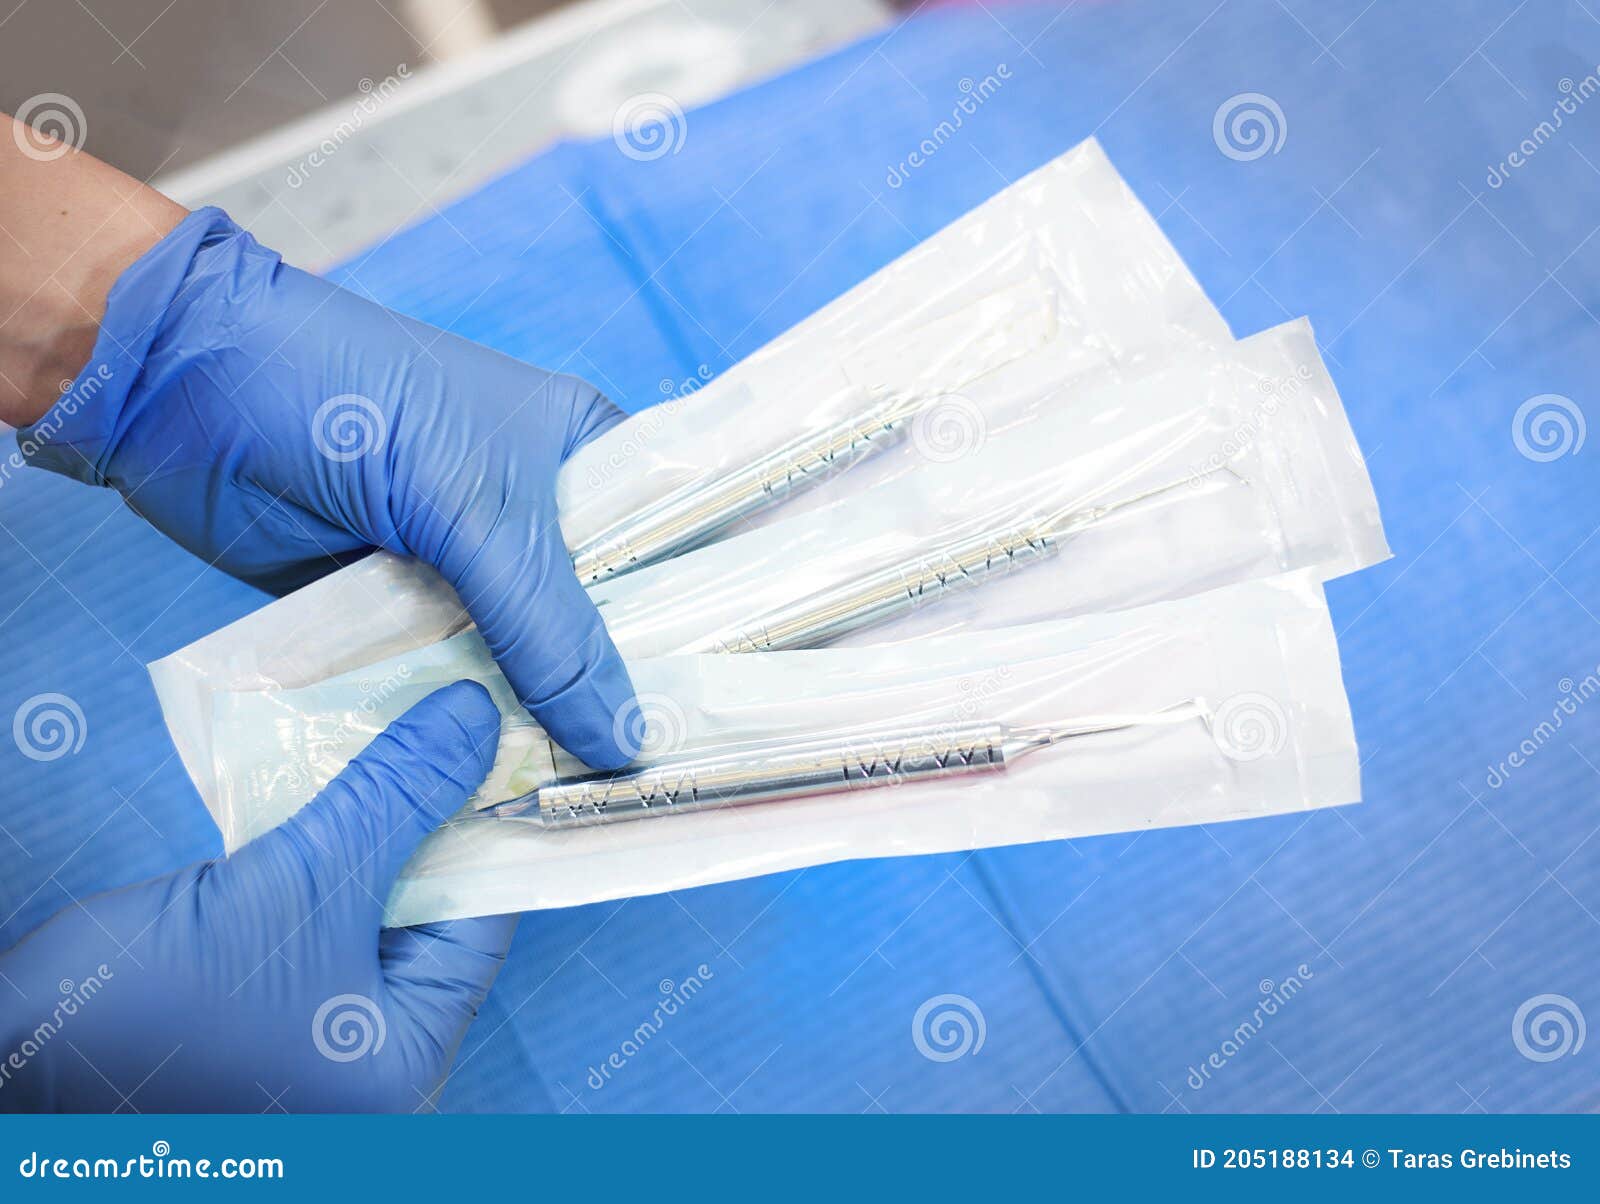 focus on doctor`s hands holding sealed sterile tools  carver . the concept of sterility